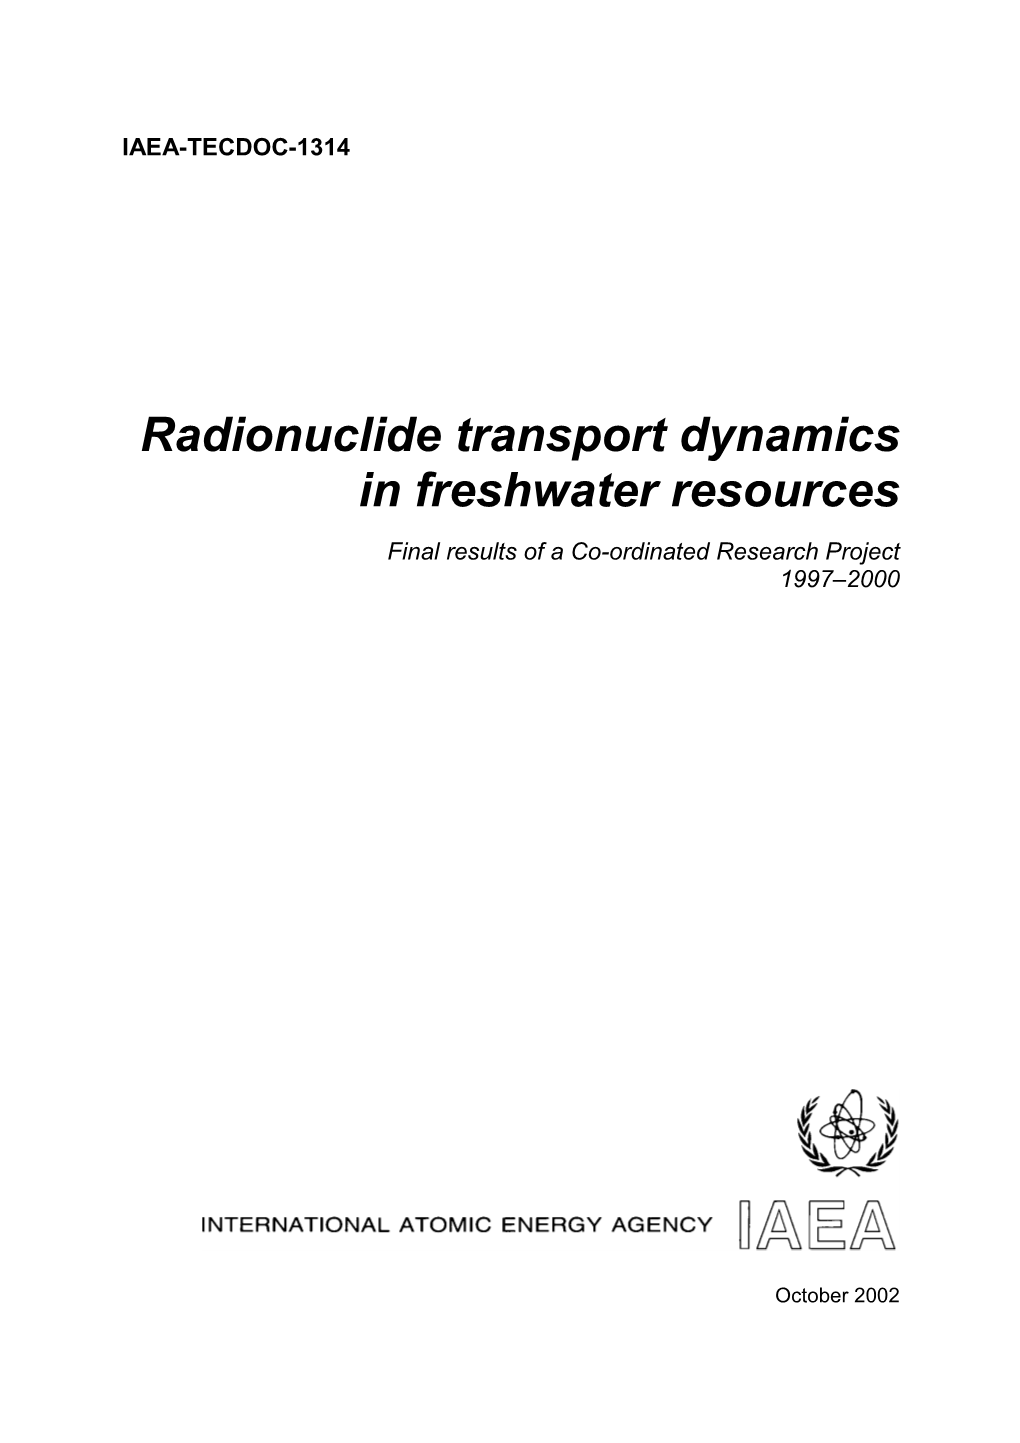 Radionuclide Transport Dynamics in Freshwater Resources